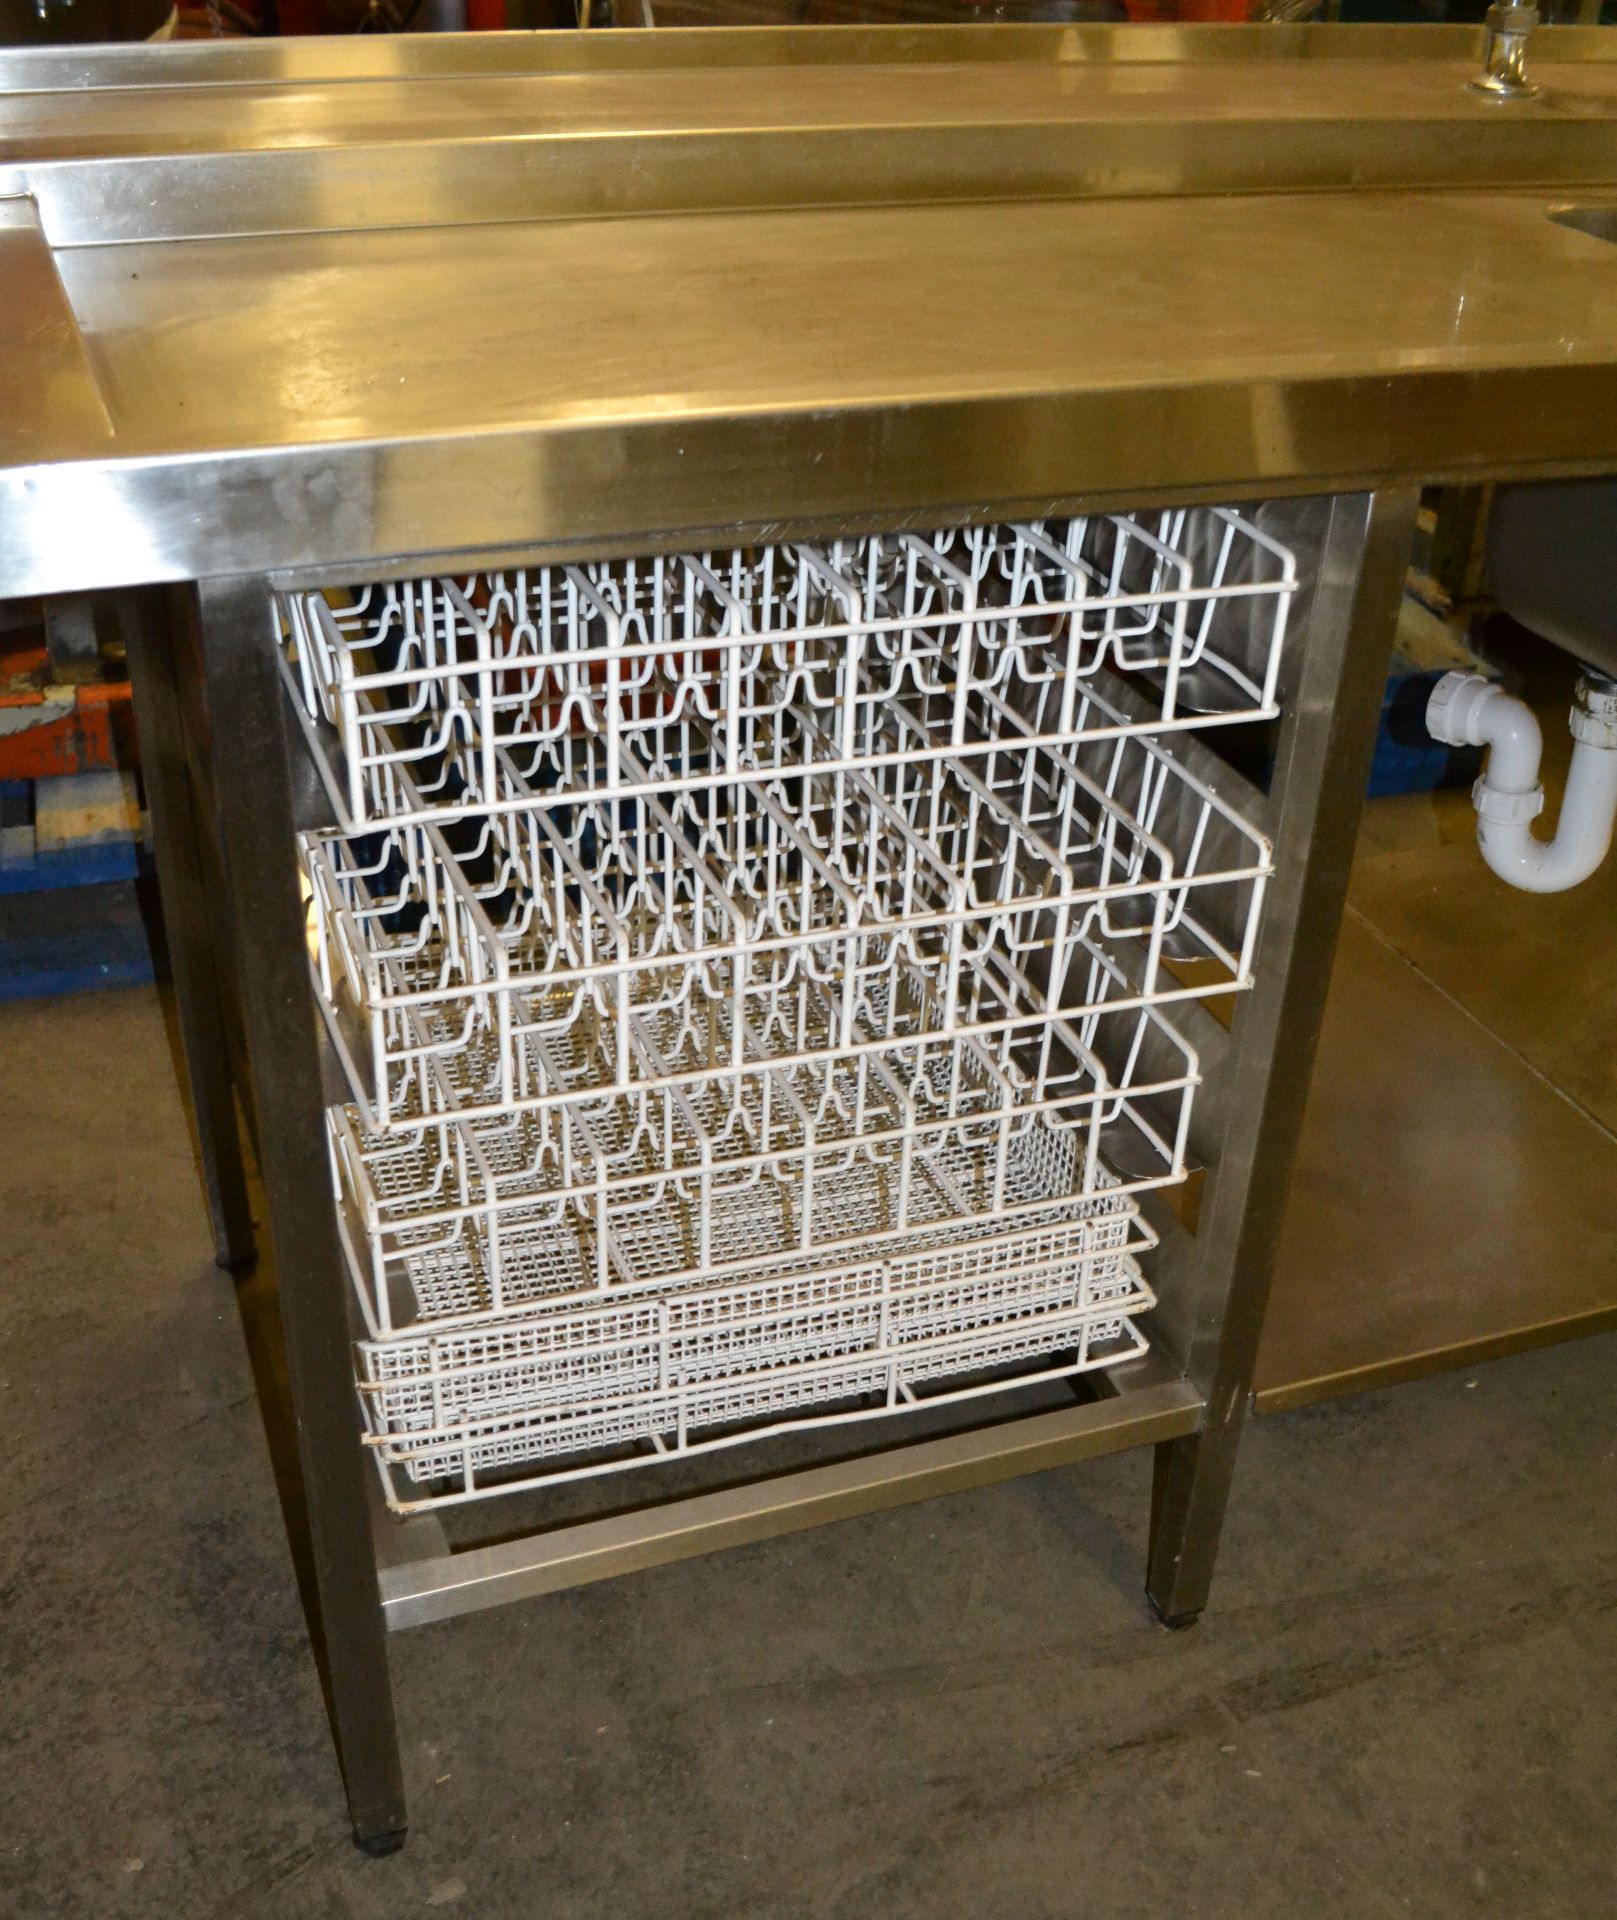 1 x Large Single Sink Unit - Large Draining Board, Draining Rack and Tap/Spray Combo - Approx. - Image 3 of 8